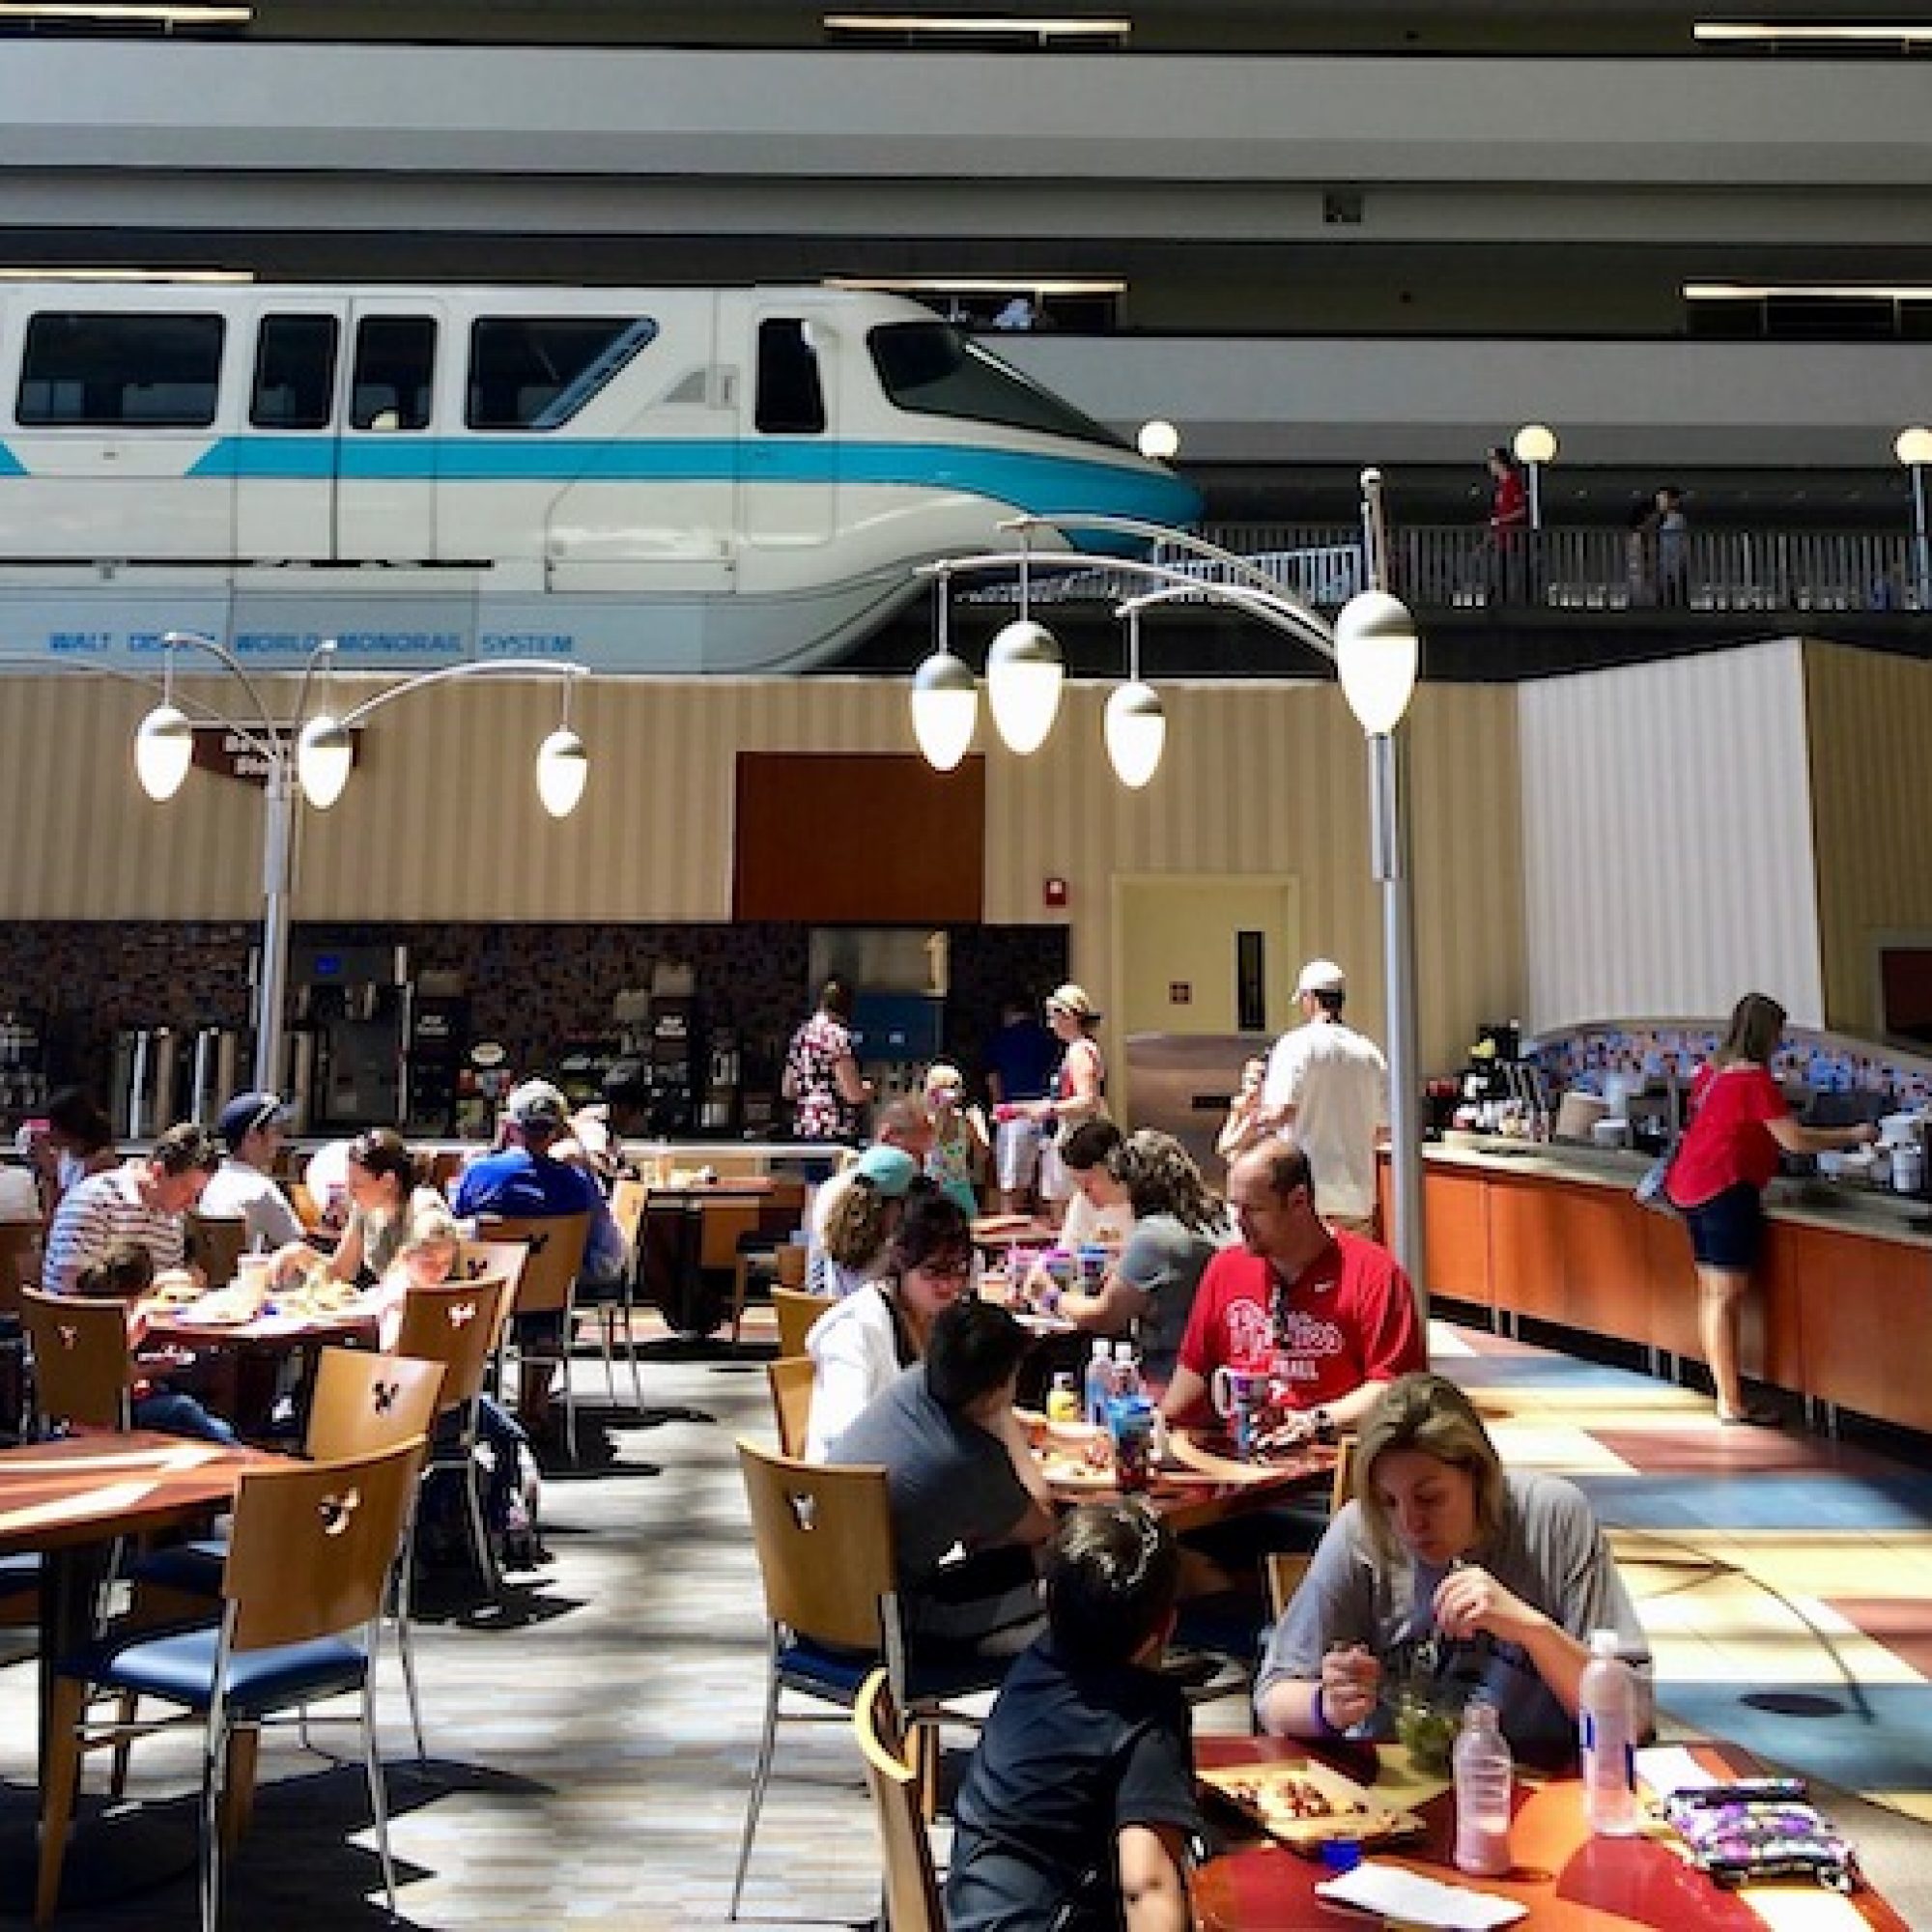 The Contempo Cafe with Monorail Views. 